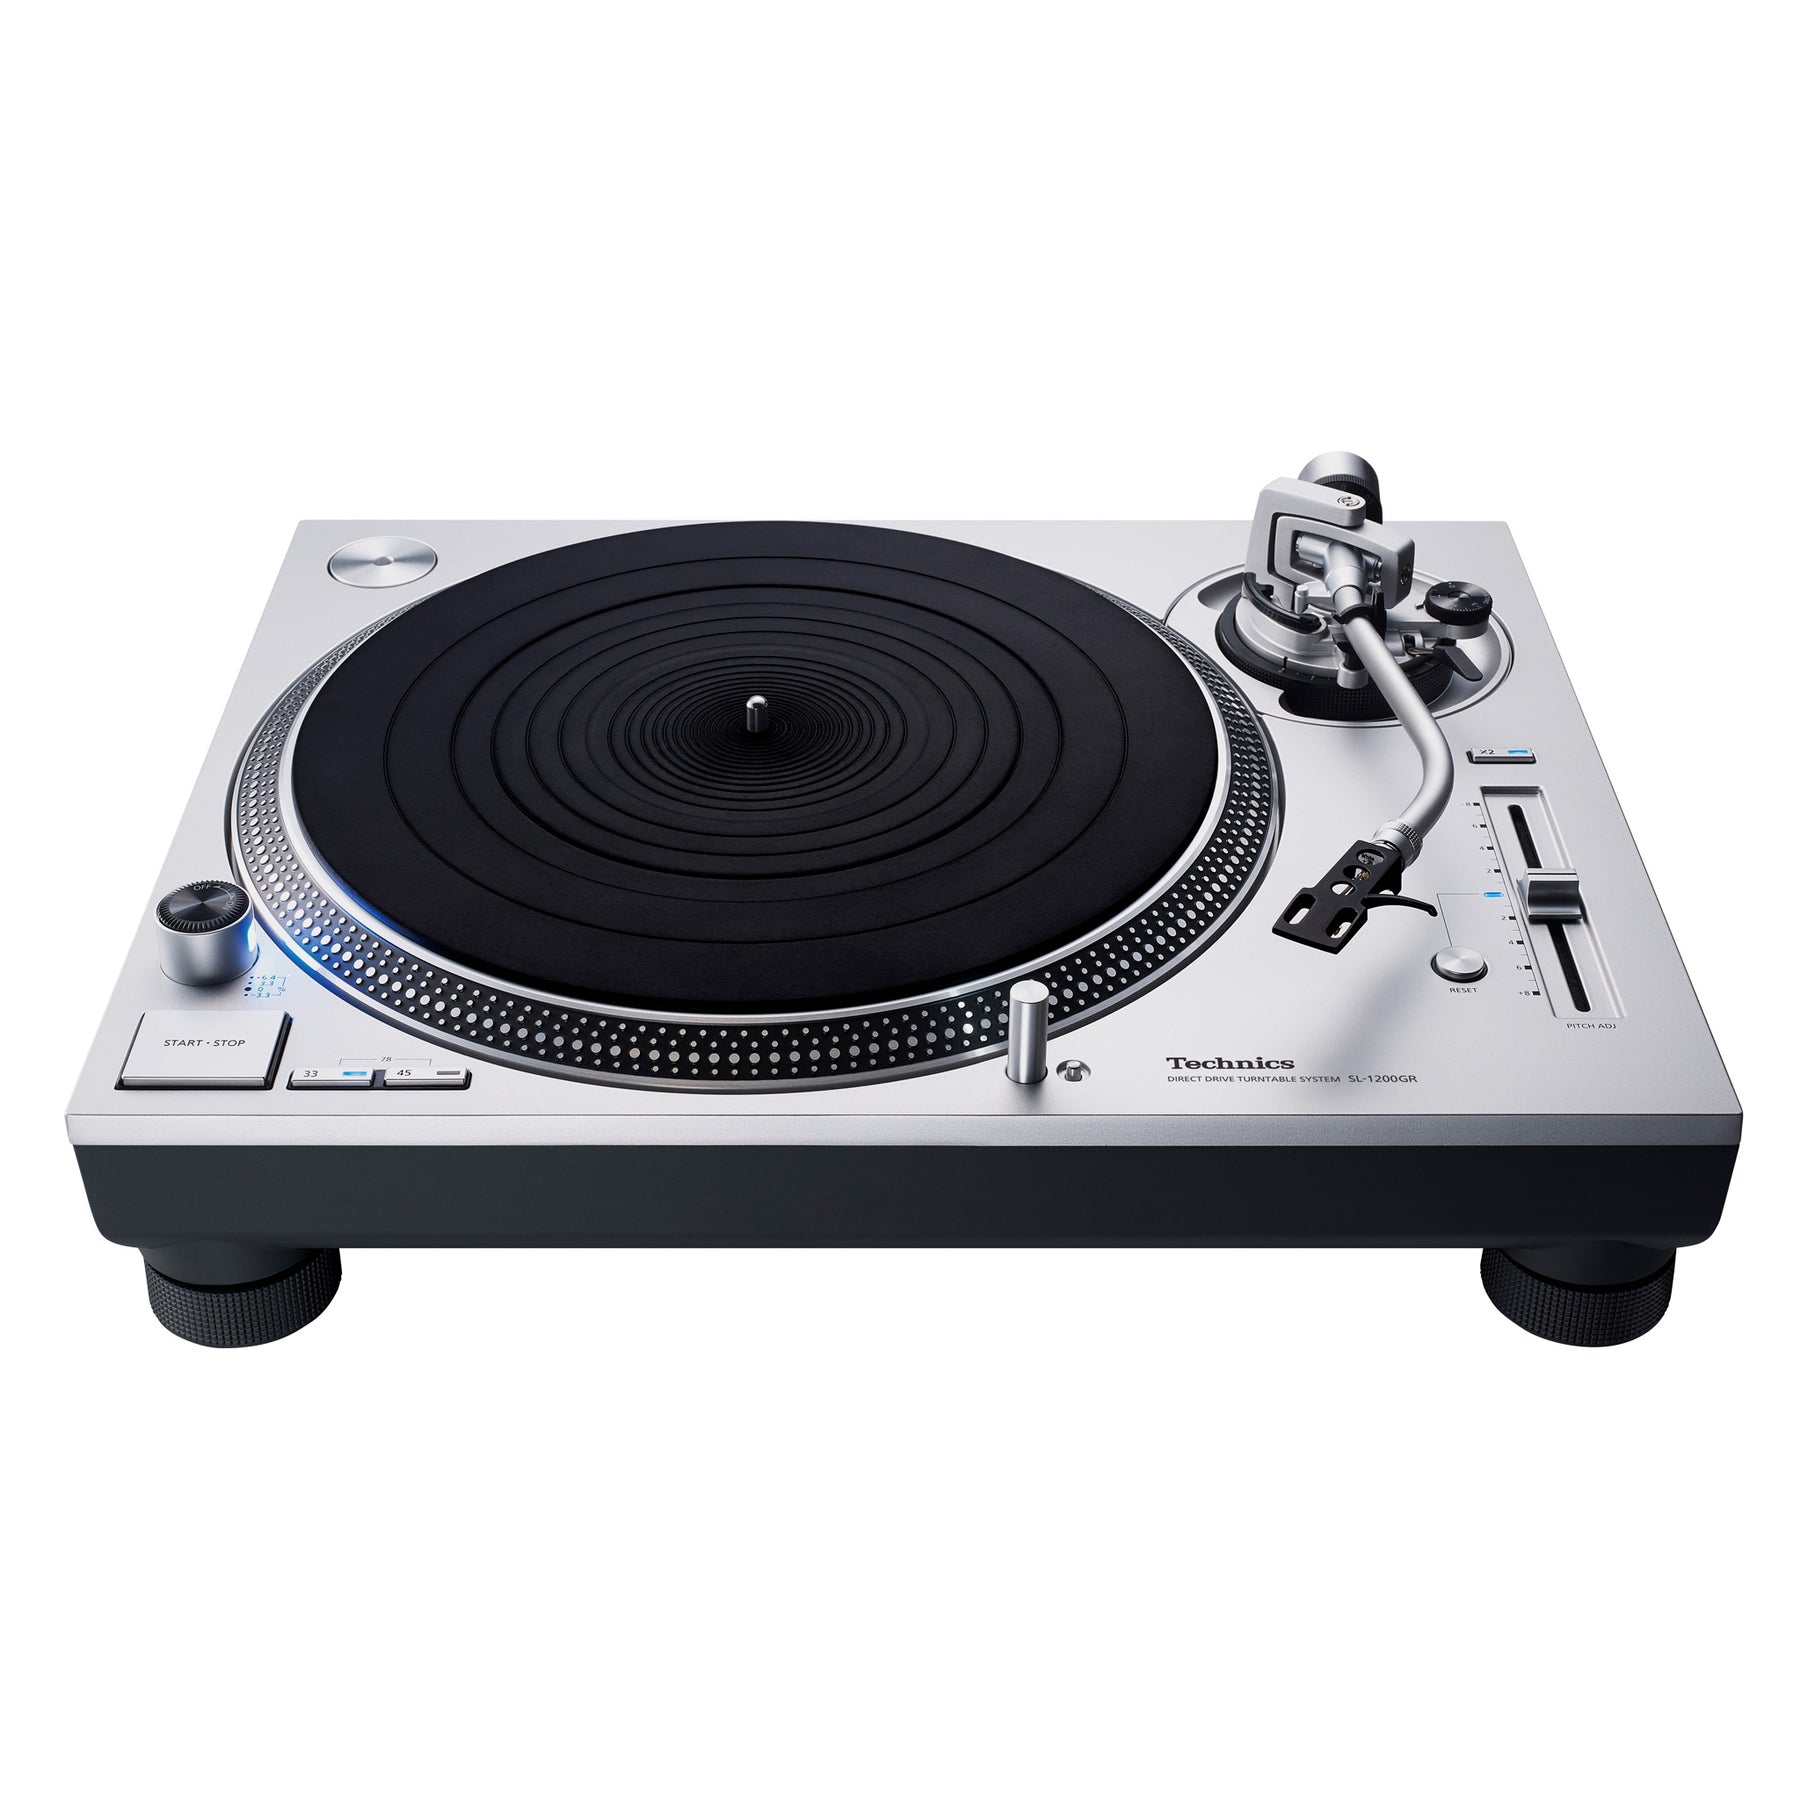 Direct Drive Turntable System SL-1200GR